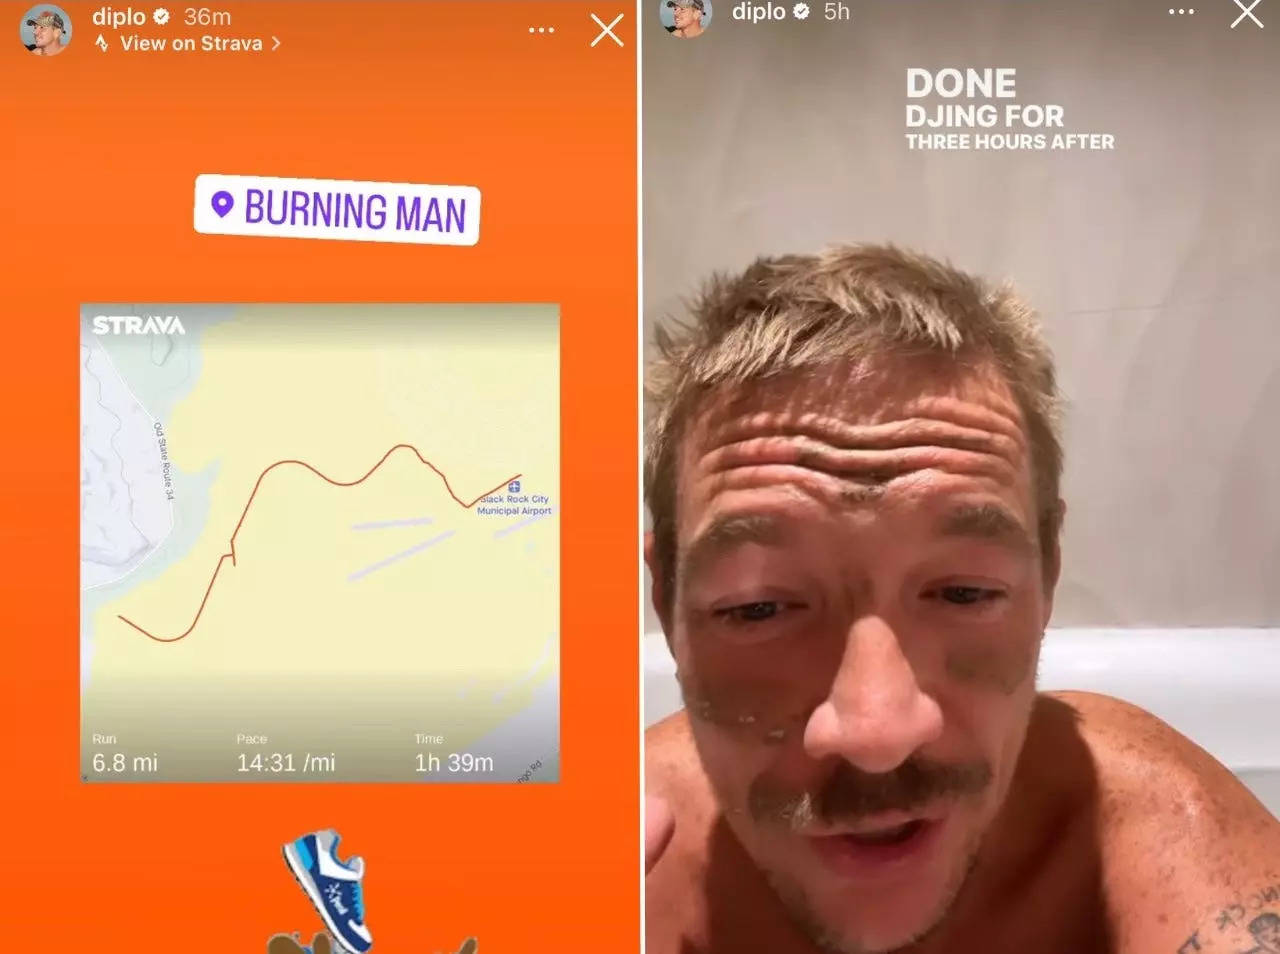 DJ Diplo defies odds, hitchhikes out of rain-drenched Burning Man